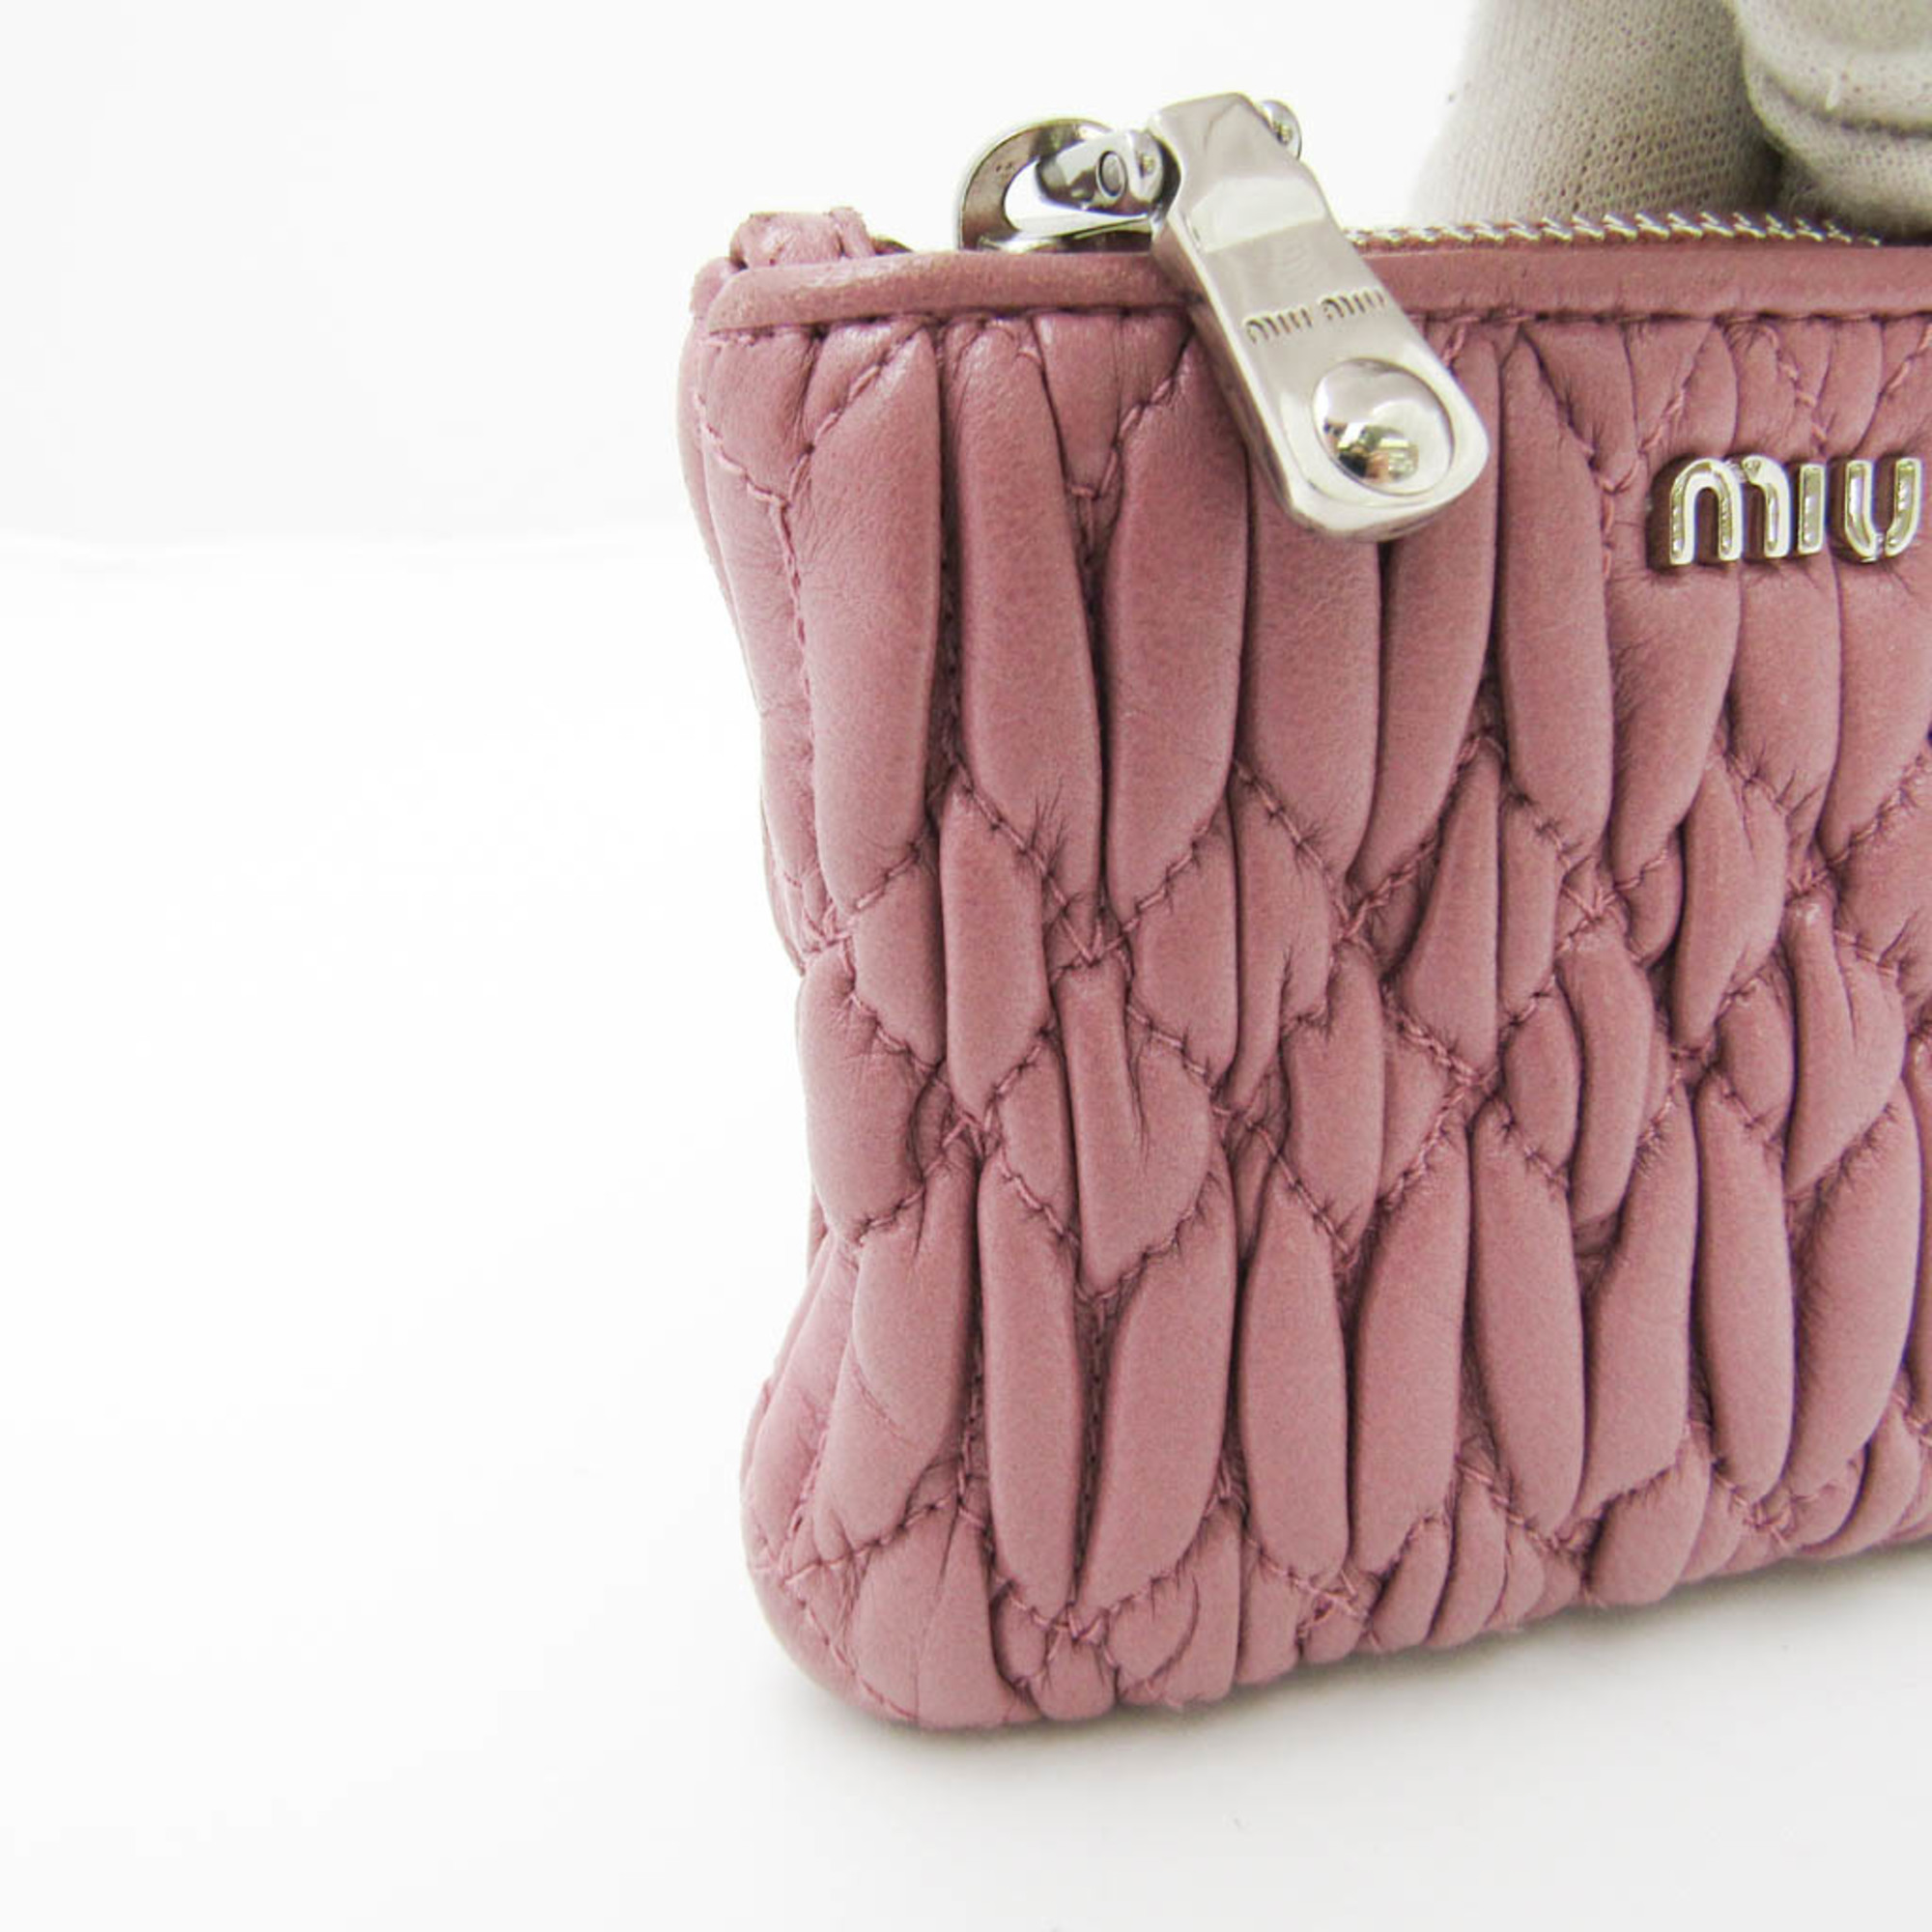 Miu Miu Matelasse With Key Ring Women's Leather Coin Purse/coin Case Light Purple